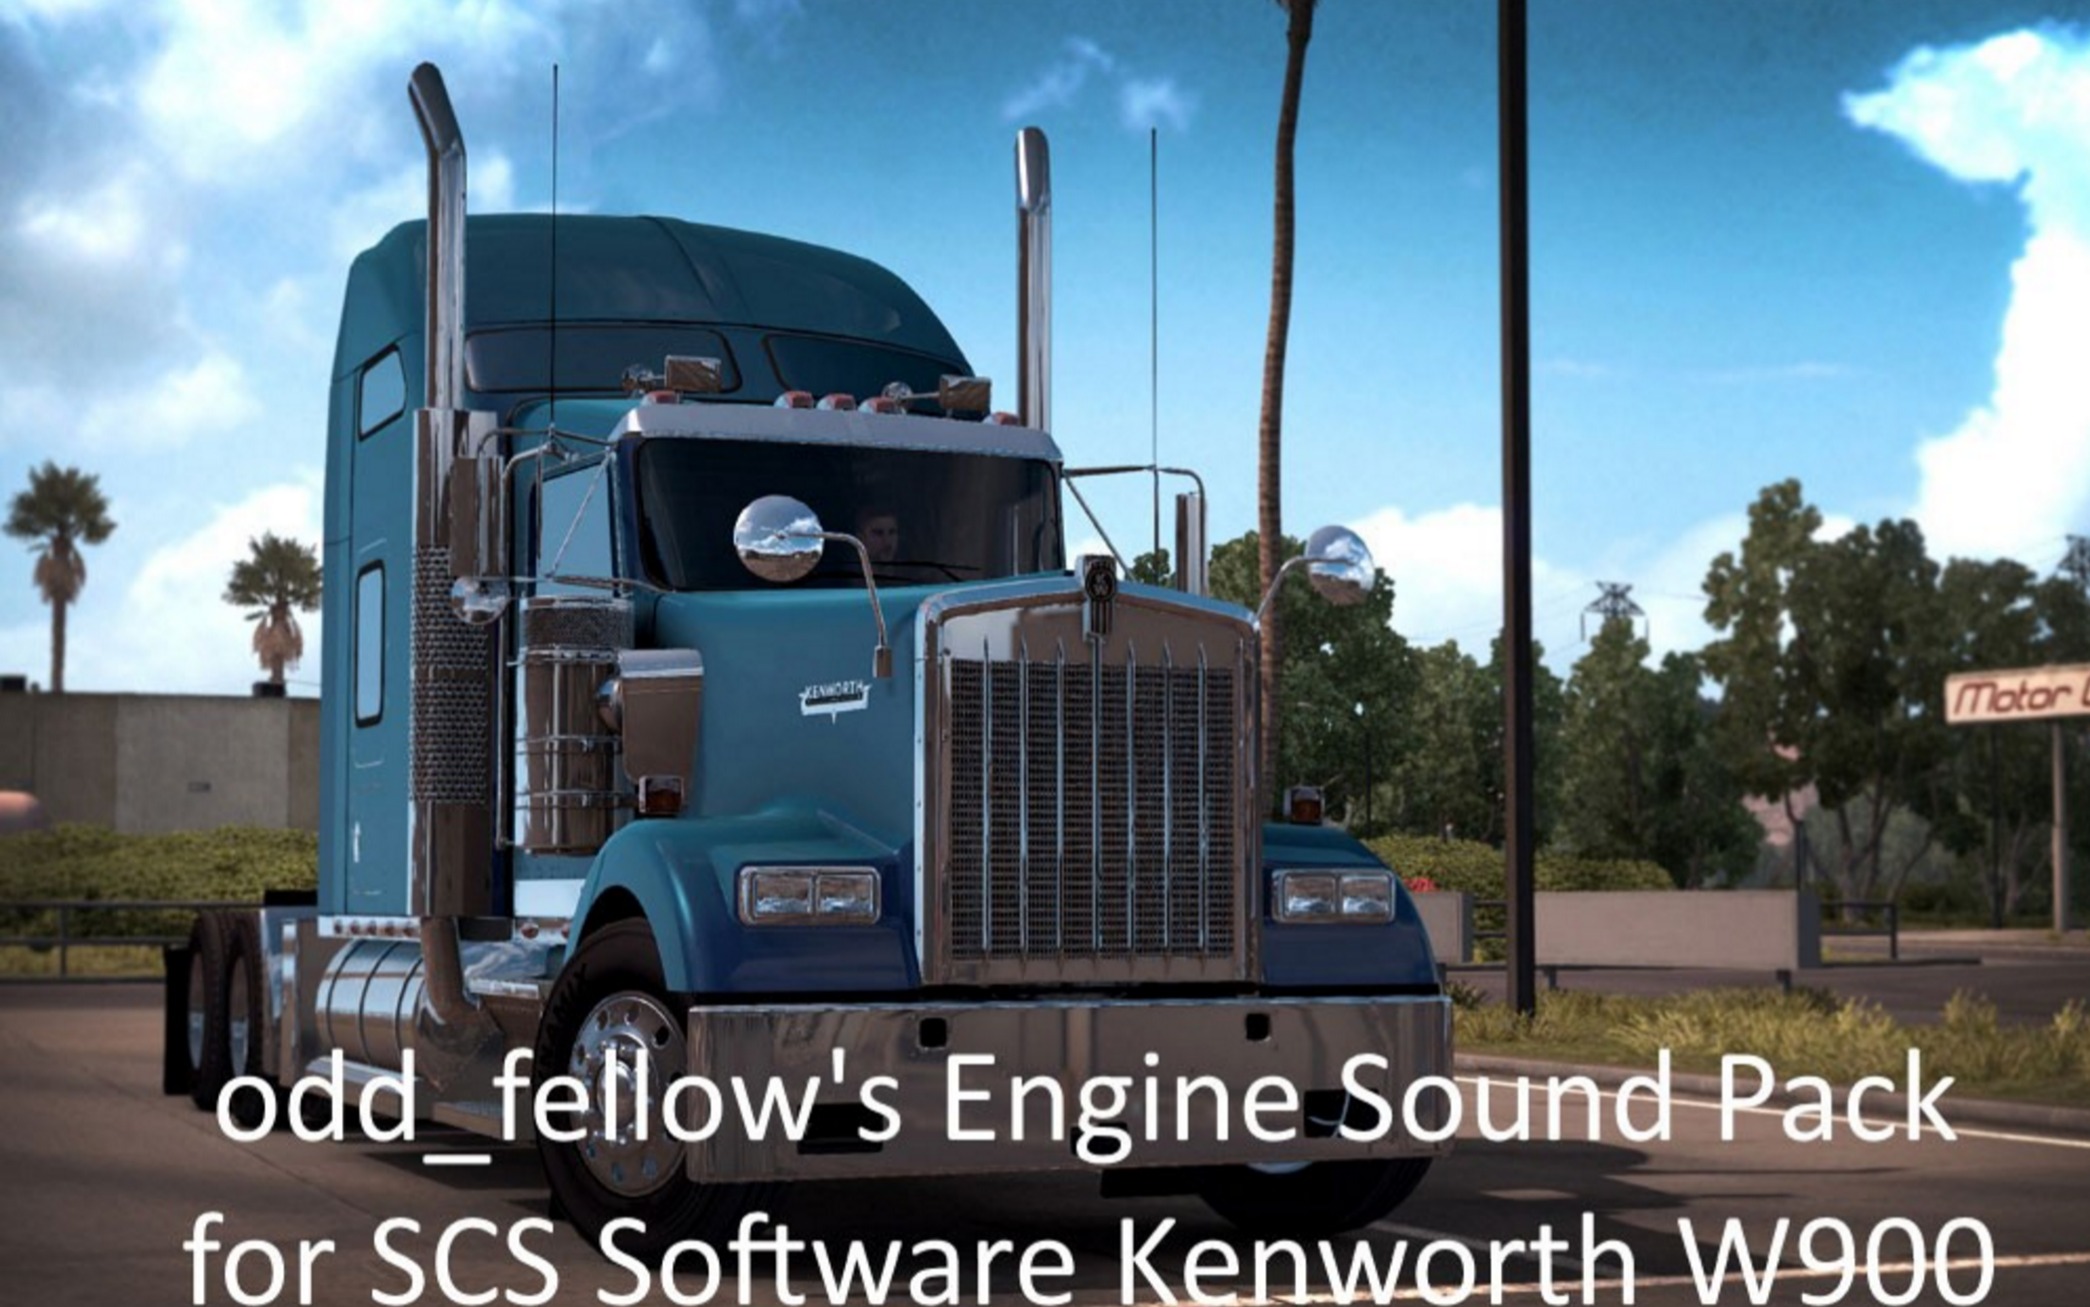 Odd_fellow’s Engine Sound Pack for Kenworth W900 by SCS